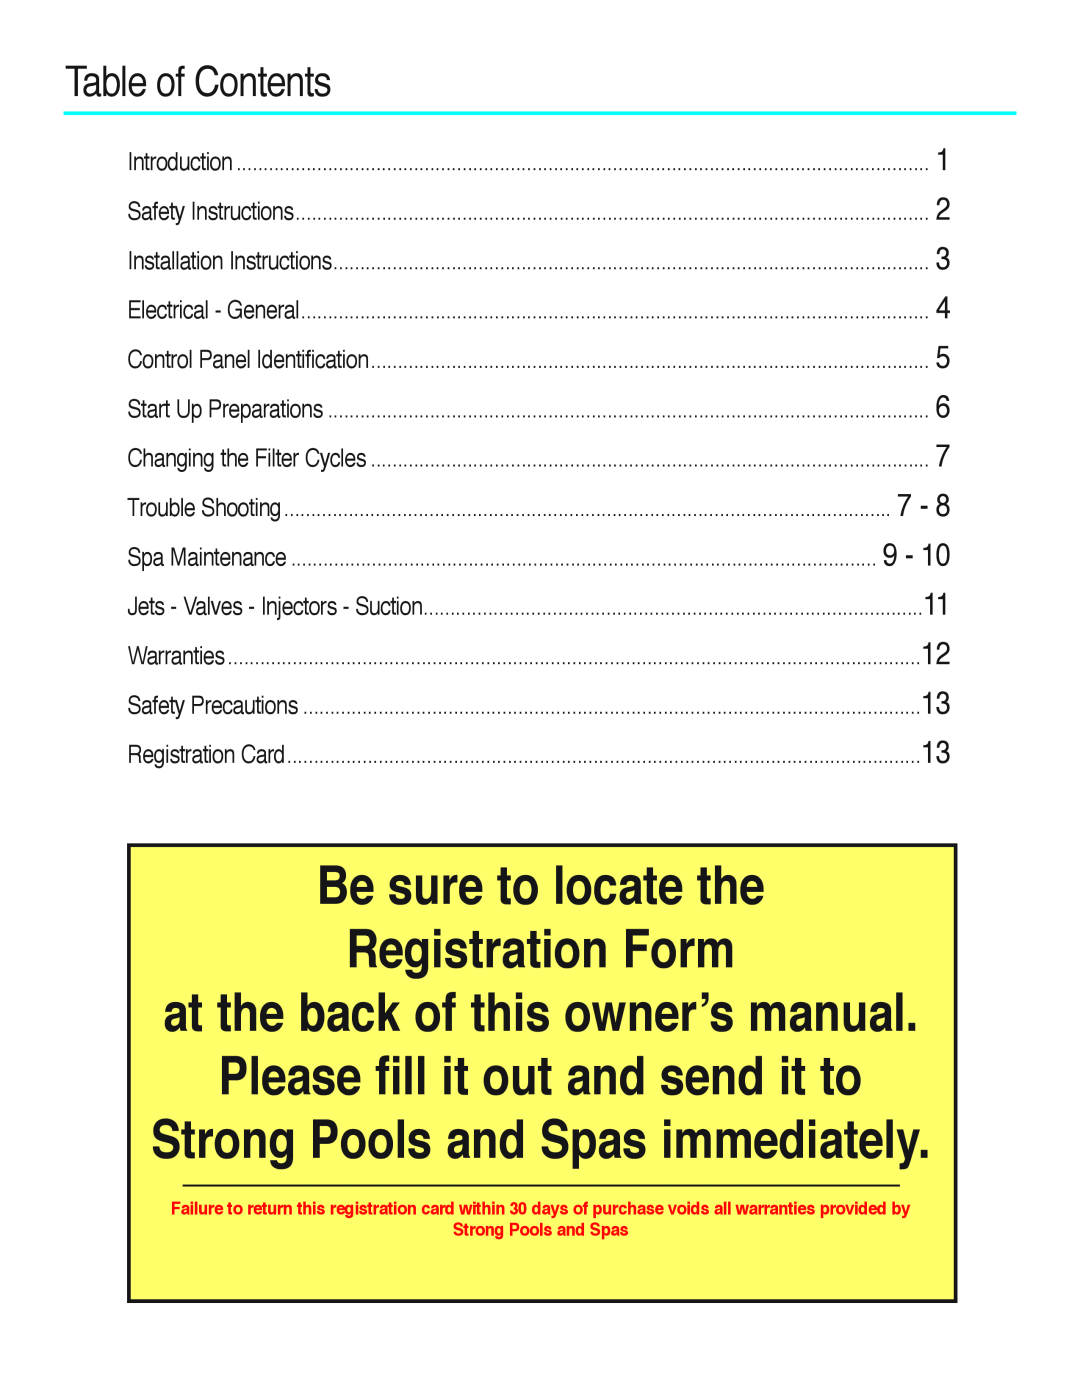 Strong Pools and Spas The Cyprus Table of Contents, Be sure to locate the Registration Form, Strong Pools and Spas 